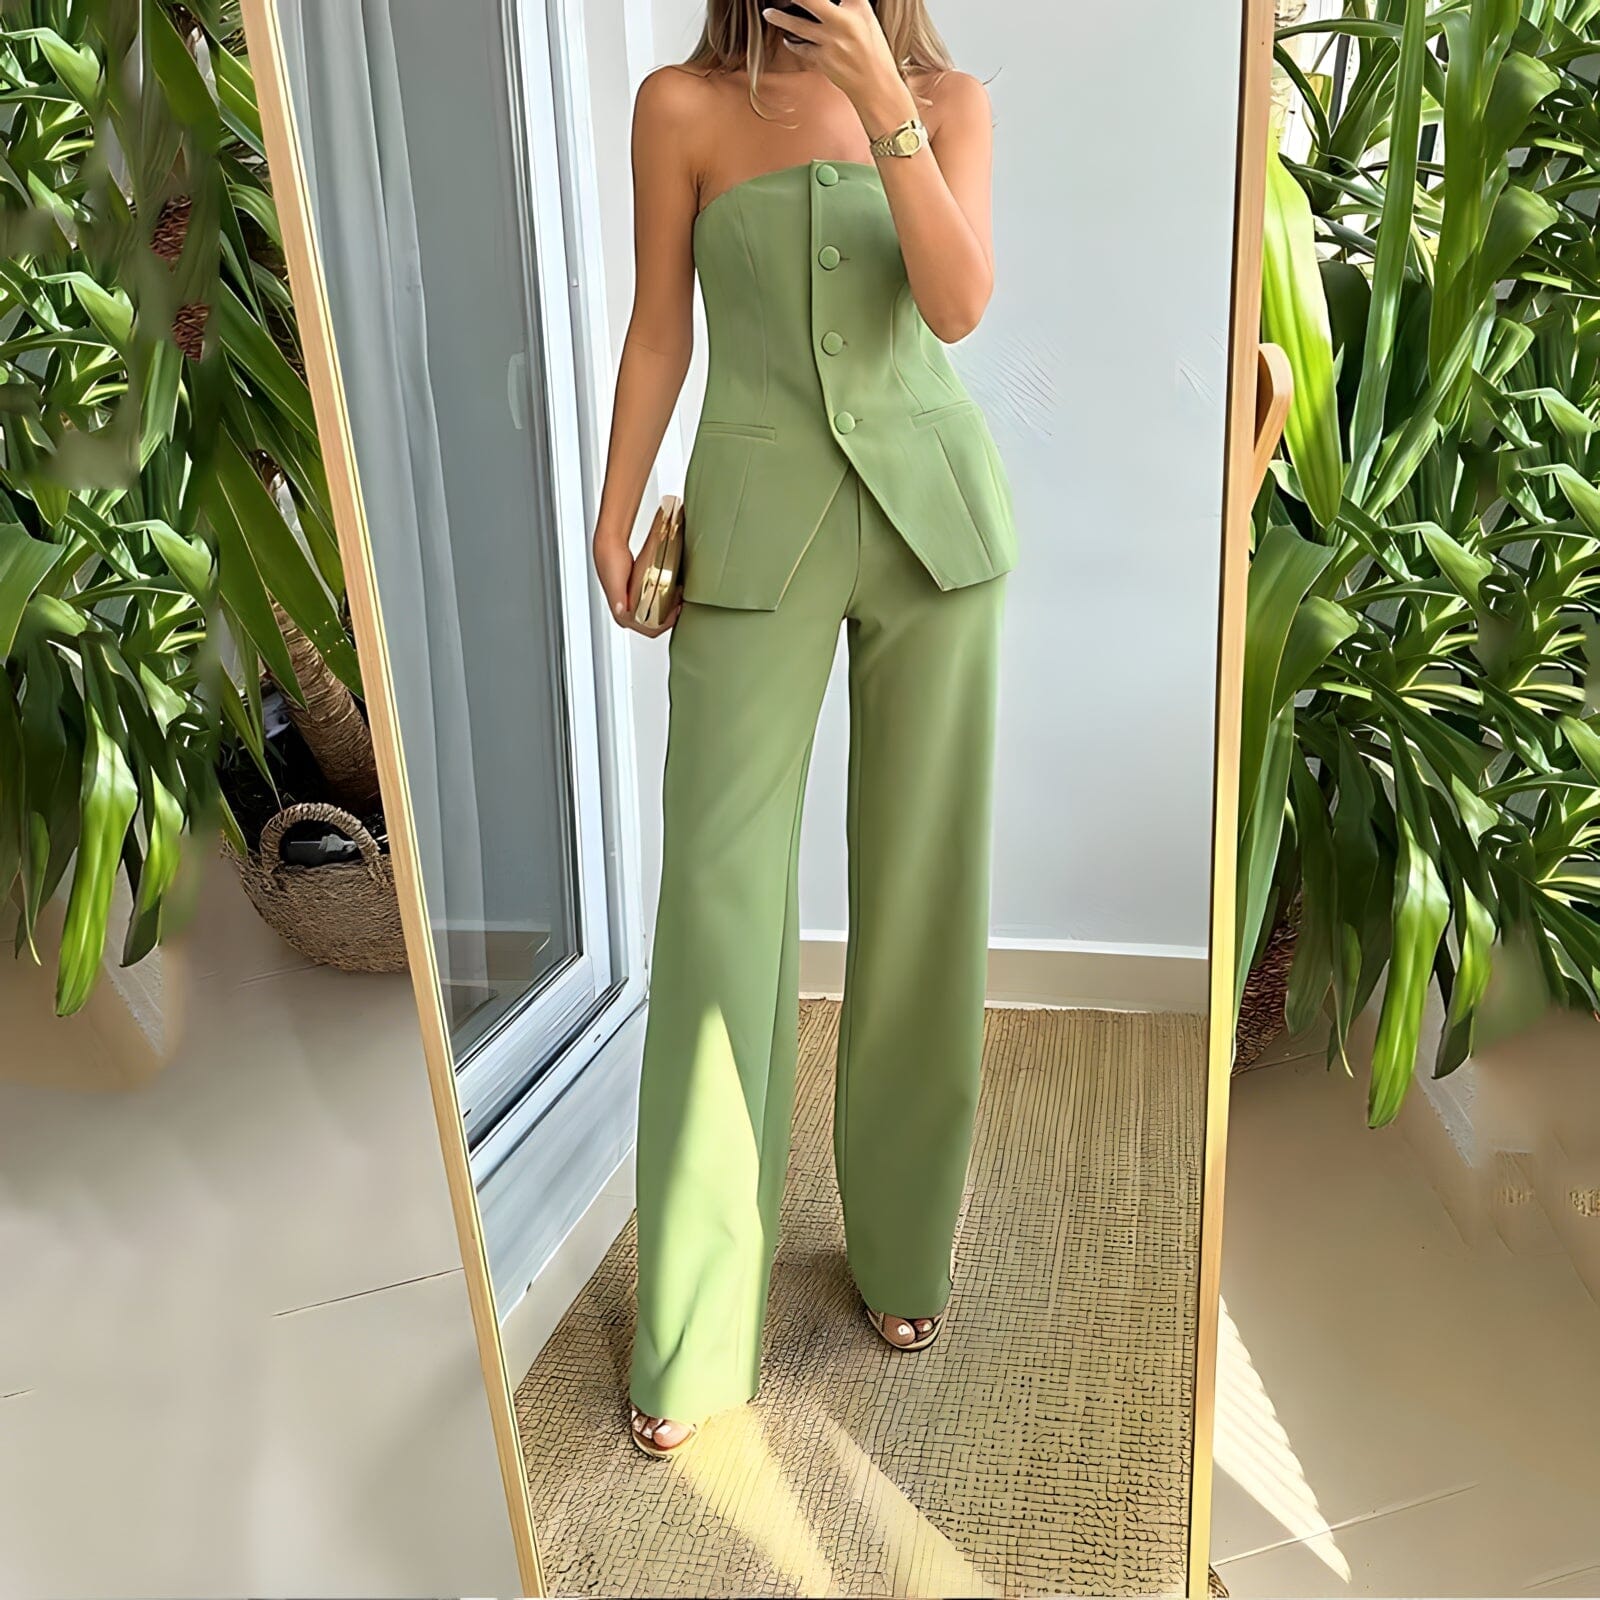 The Anneliese Sleeveless Jumpsuit - Multiple Colors SA Formal Green S 